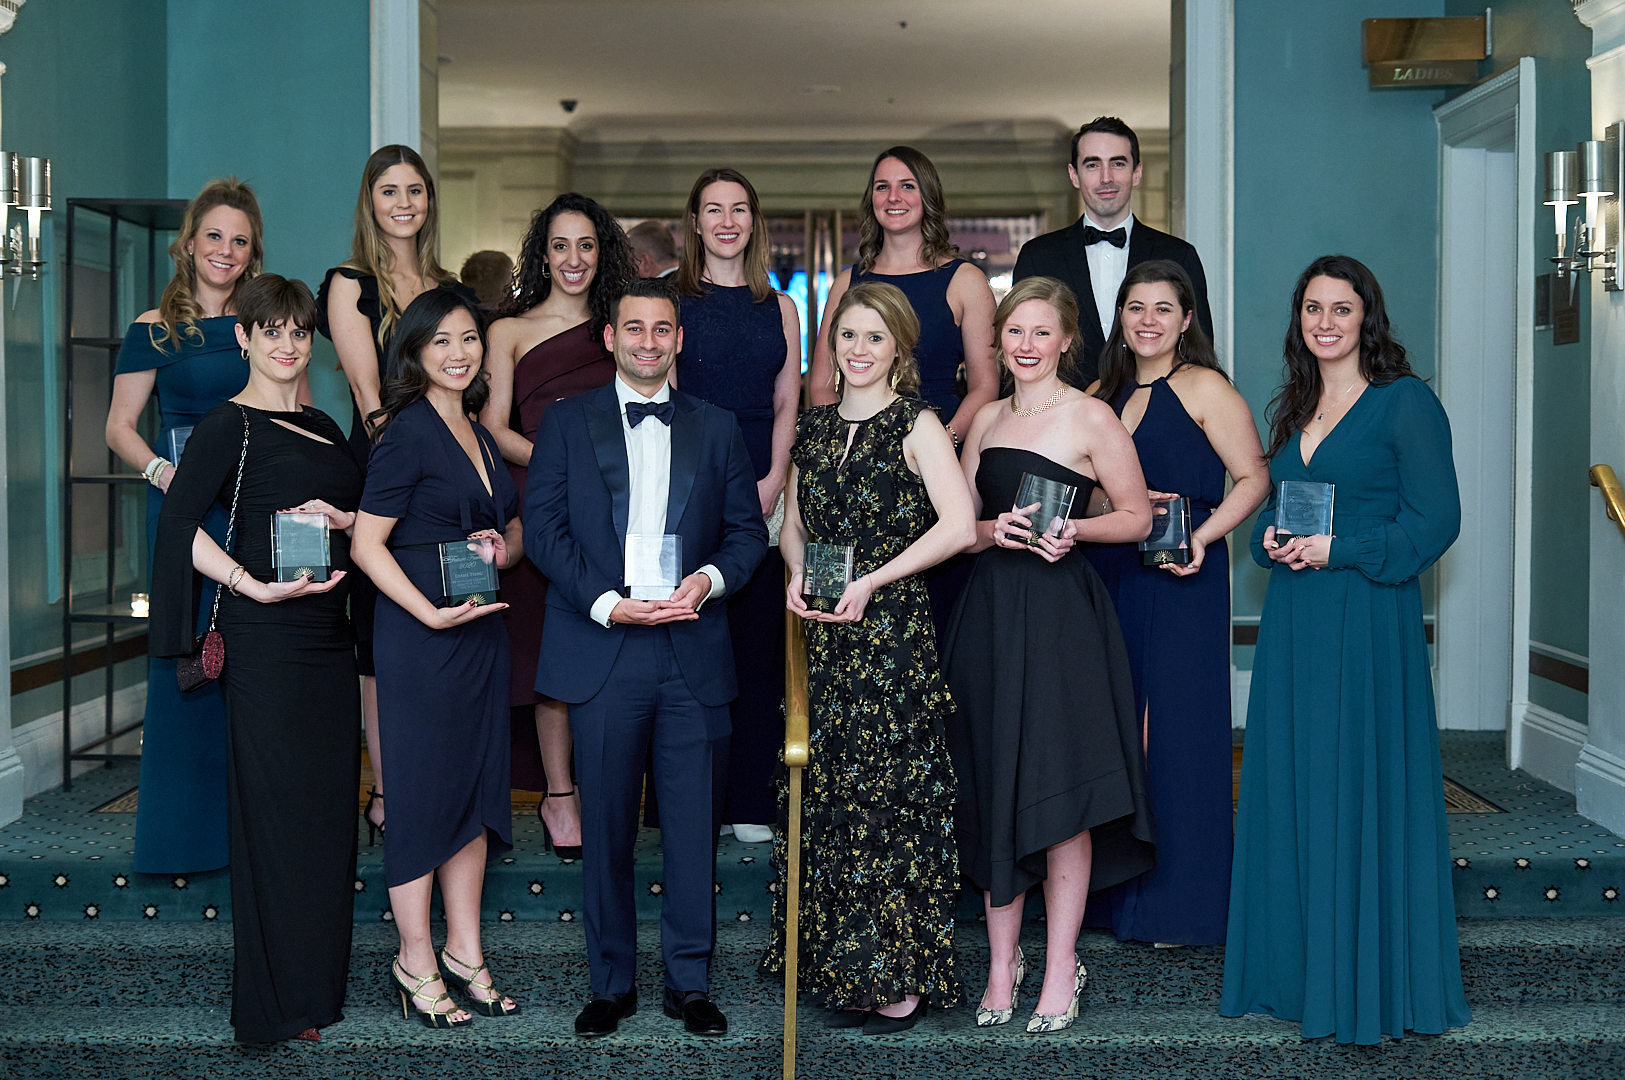 Highlights from the 2020 Medical Advertising Hall of Fame gala